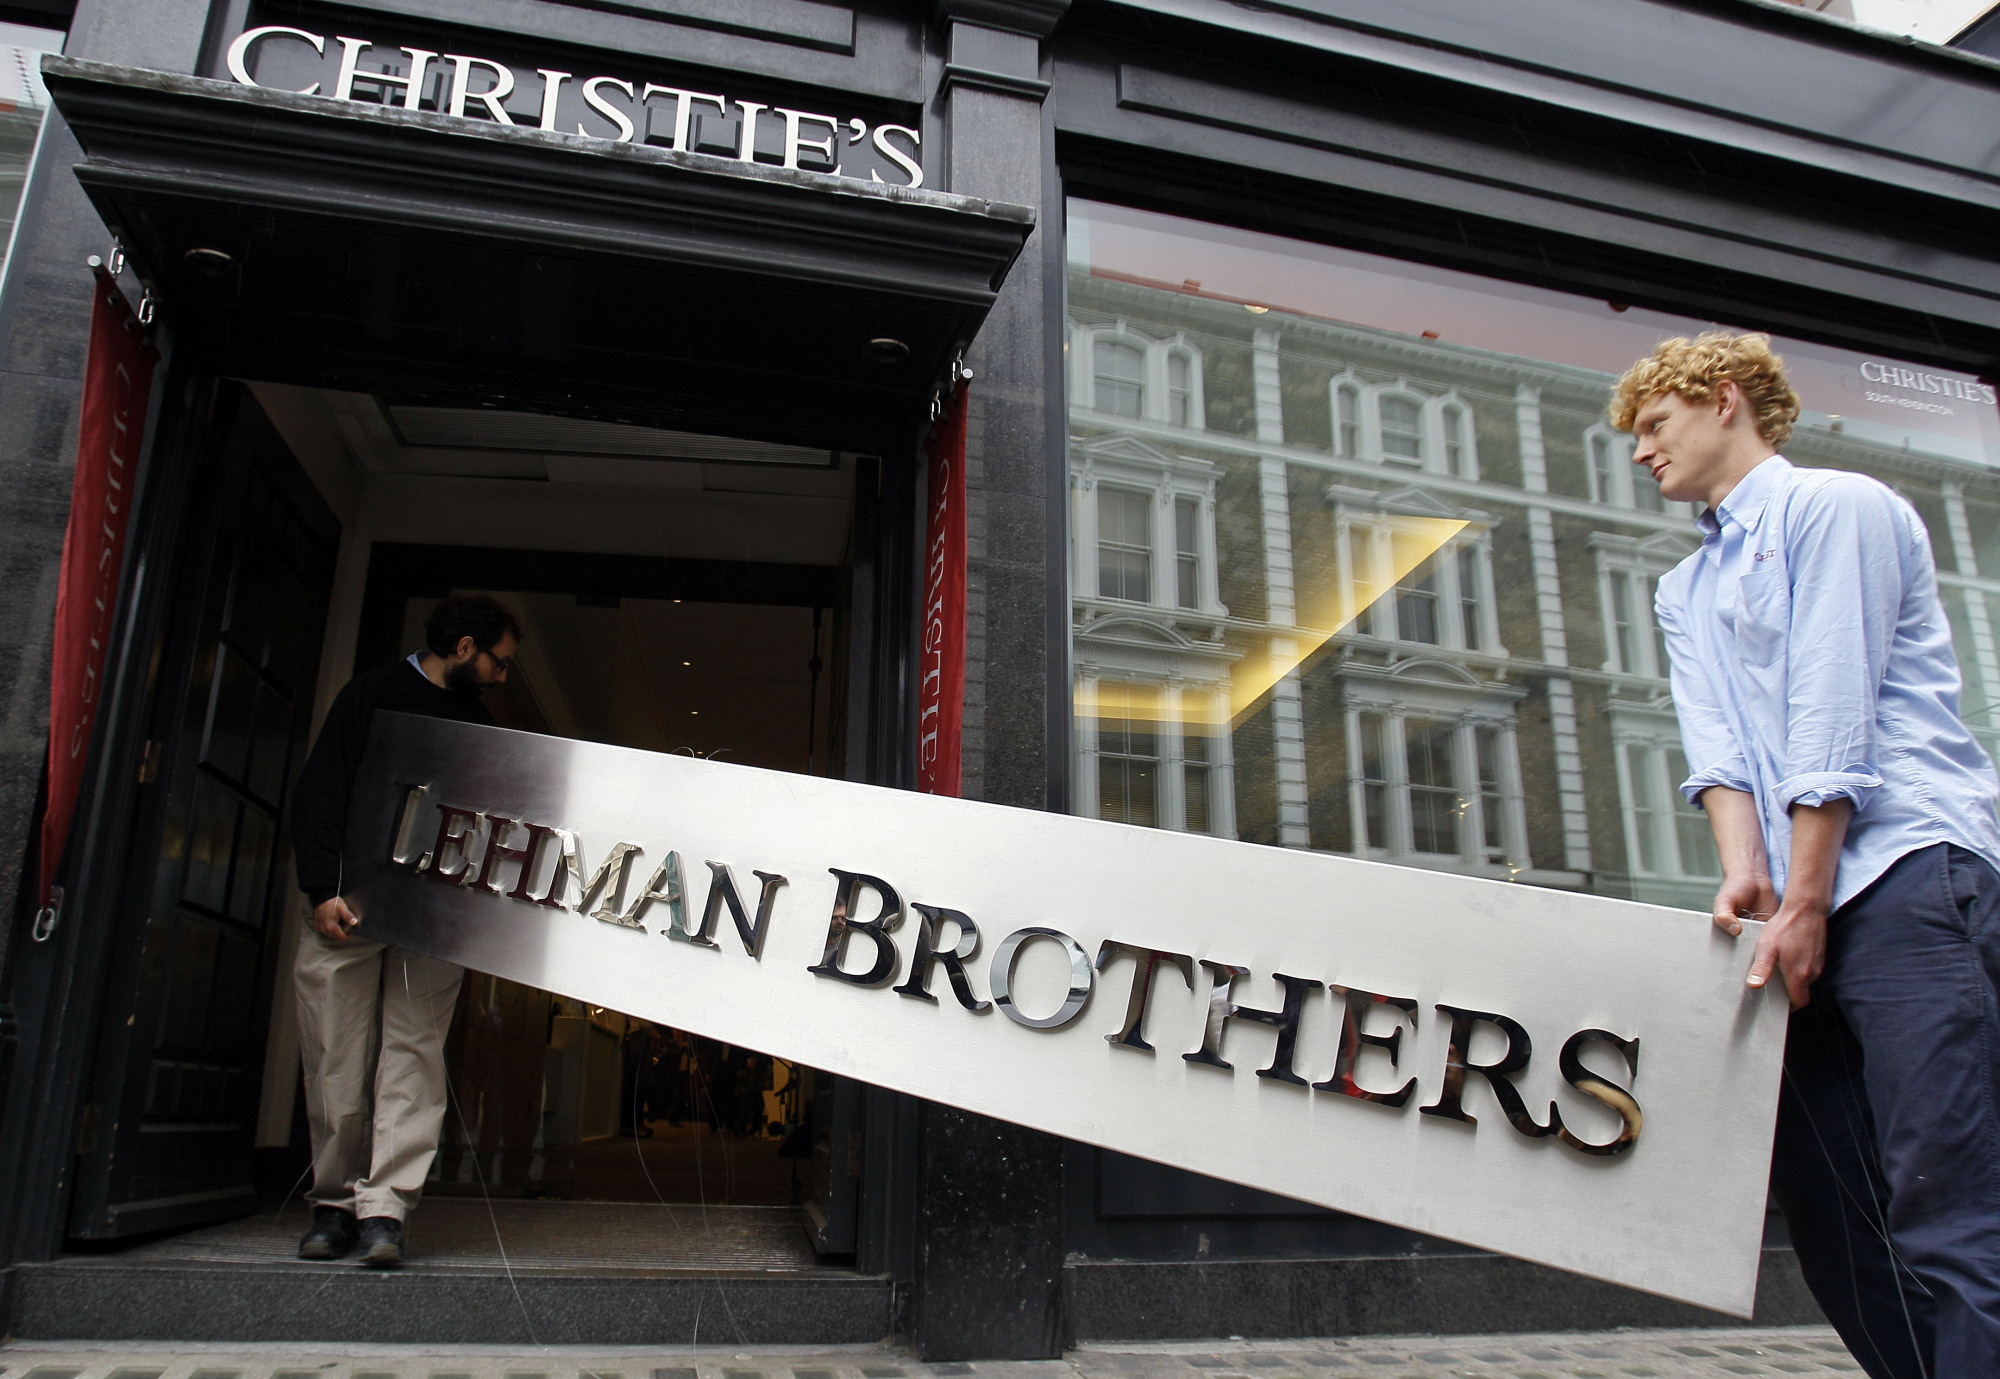 A Lehman Brothers corporate sign is carried into an auction house in London in September 2010. The 2008 bankruptcy of the global financial services firm gave birth to the roaring and tumultuous decade that followed. | ASSOCIATED PRESS